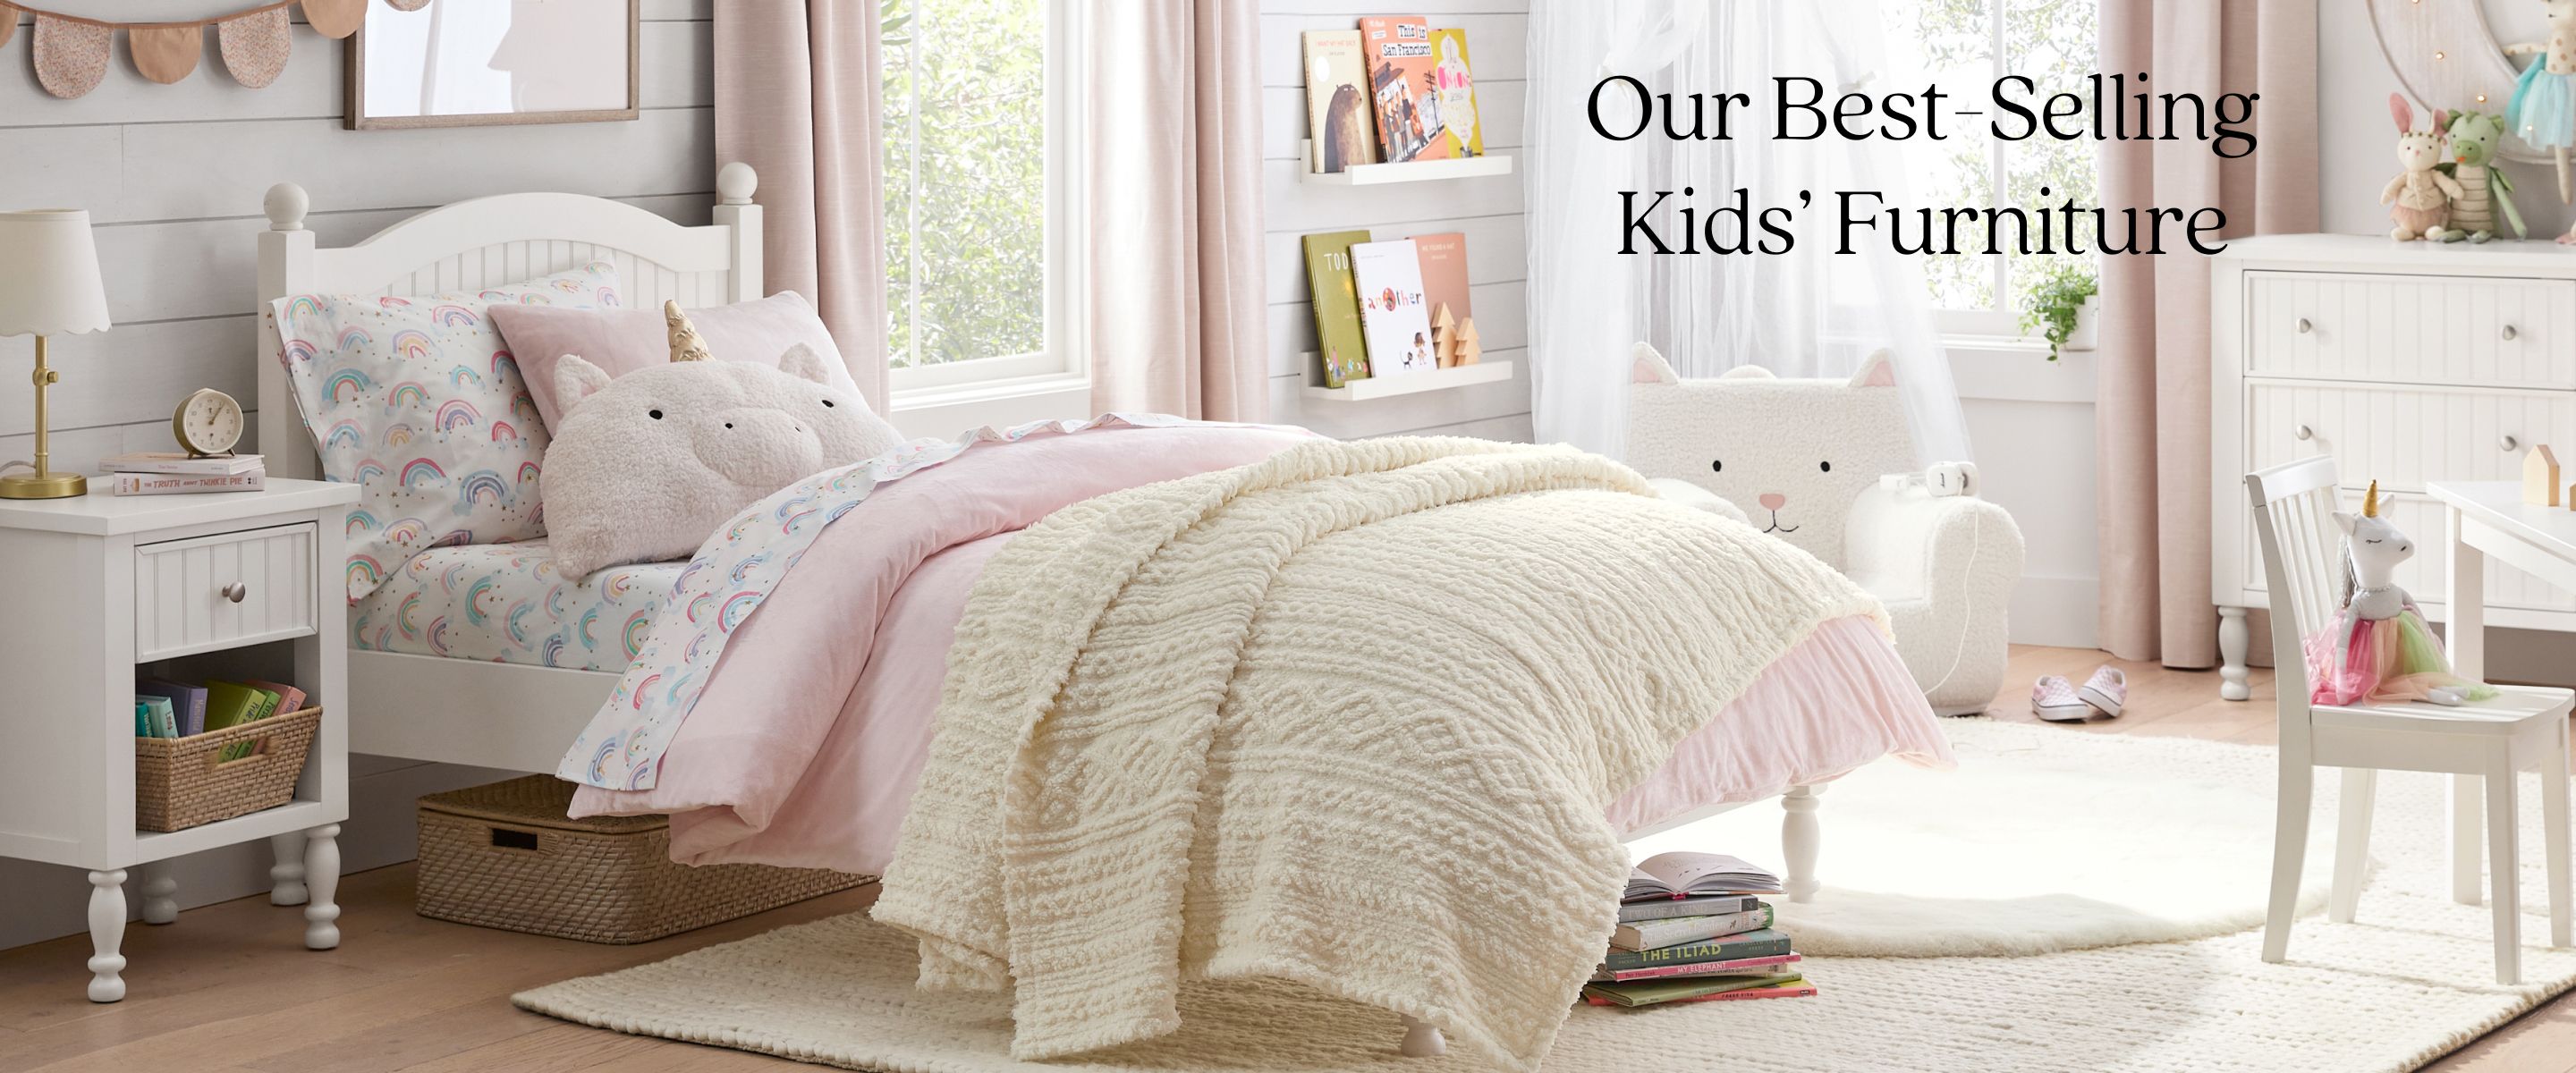 Our Best-Selling Kids' Furniture